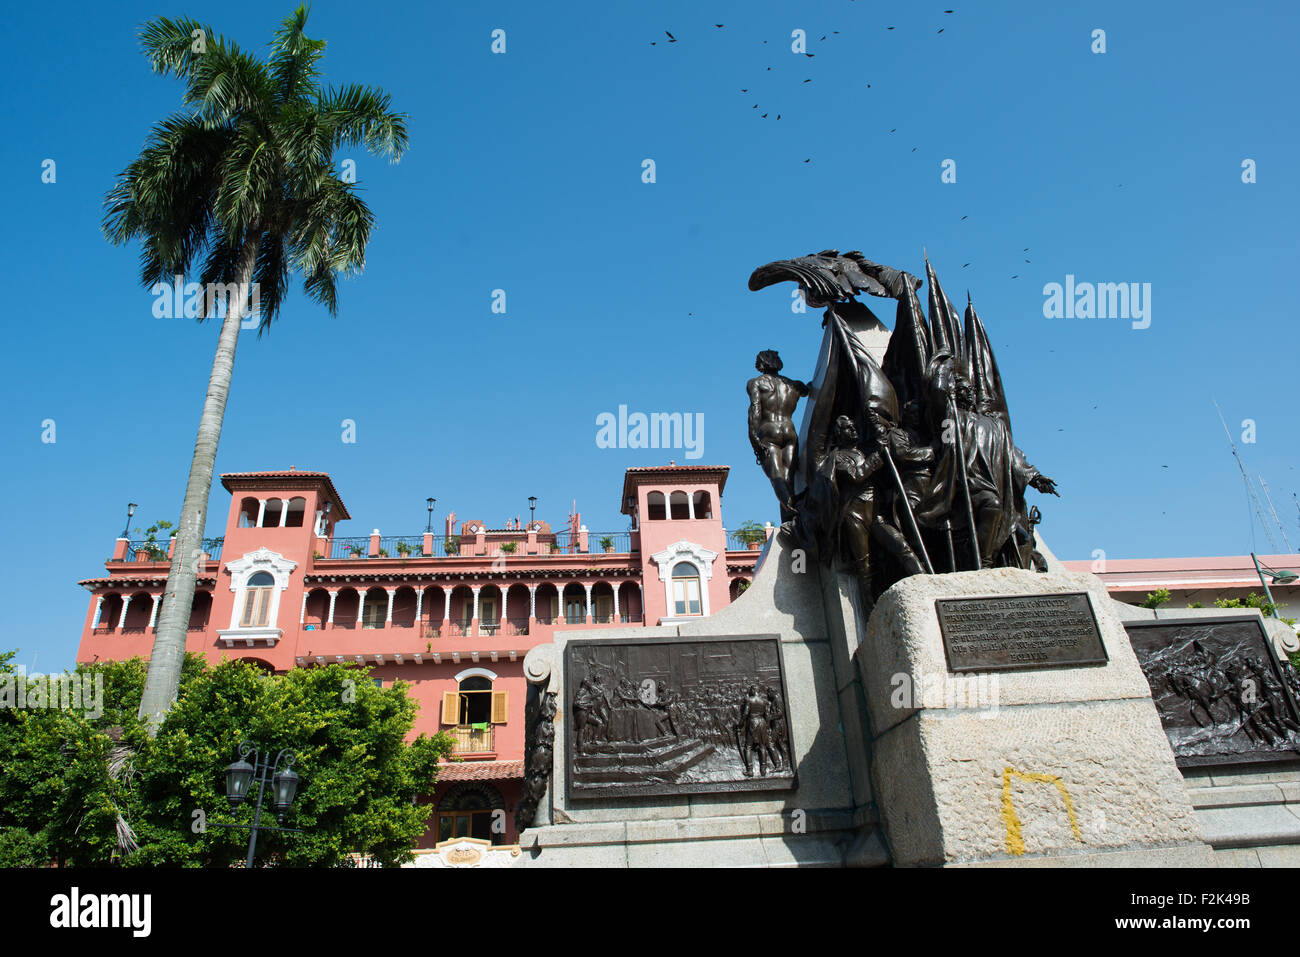 PANAMA CITY, Panama--Surrounded by 19th century architecture, Plaza Simon Bolivar is a small public square in Casco Viejo, a block from the waterfront. It is named after Venezuelan general Simón Bolívar, the "Liberator of Latin America", and a statue of Bolivar stands prominently in the center of the square. Stock Photo